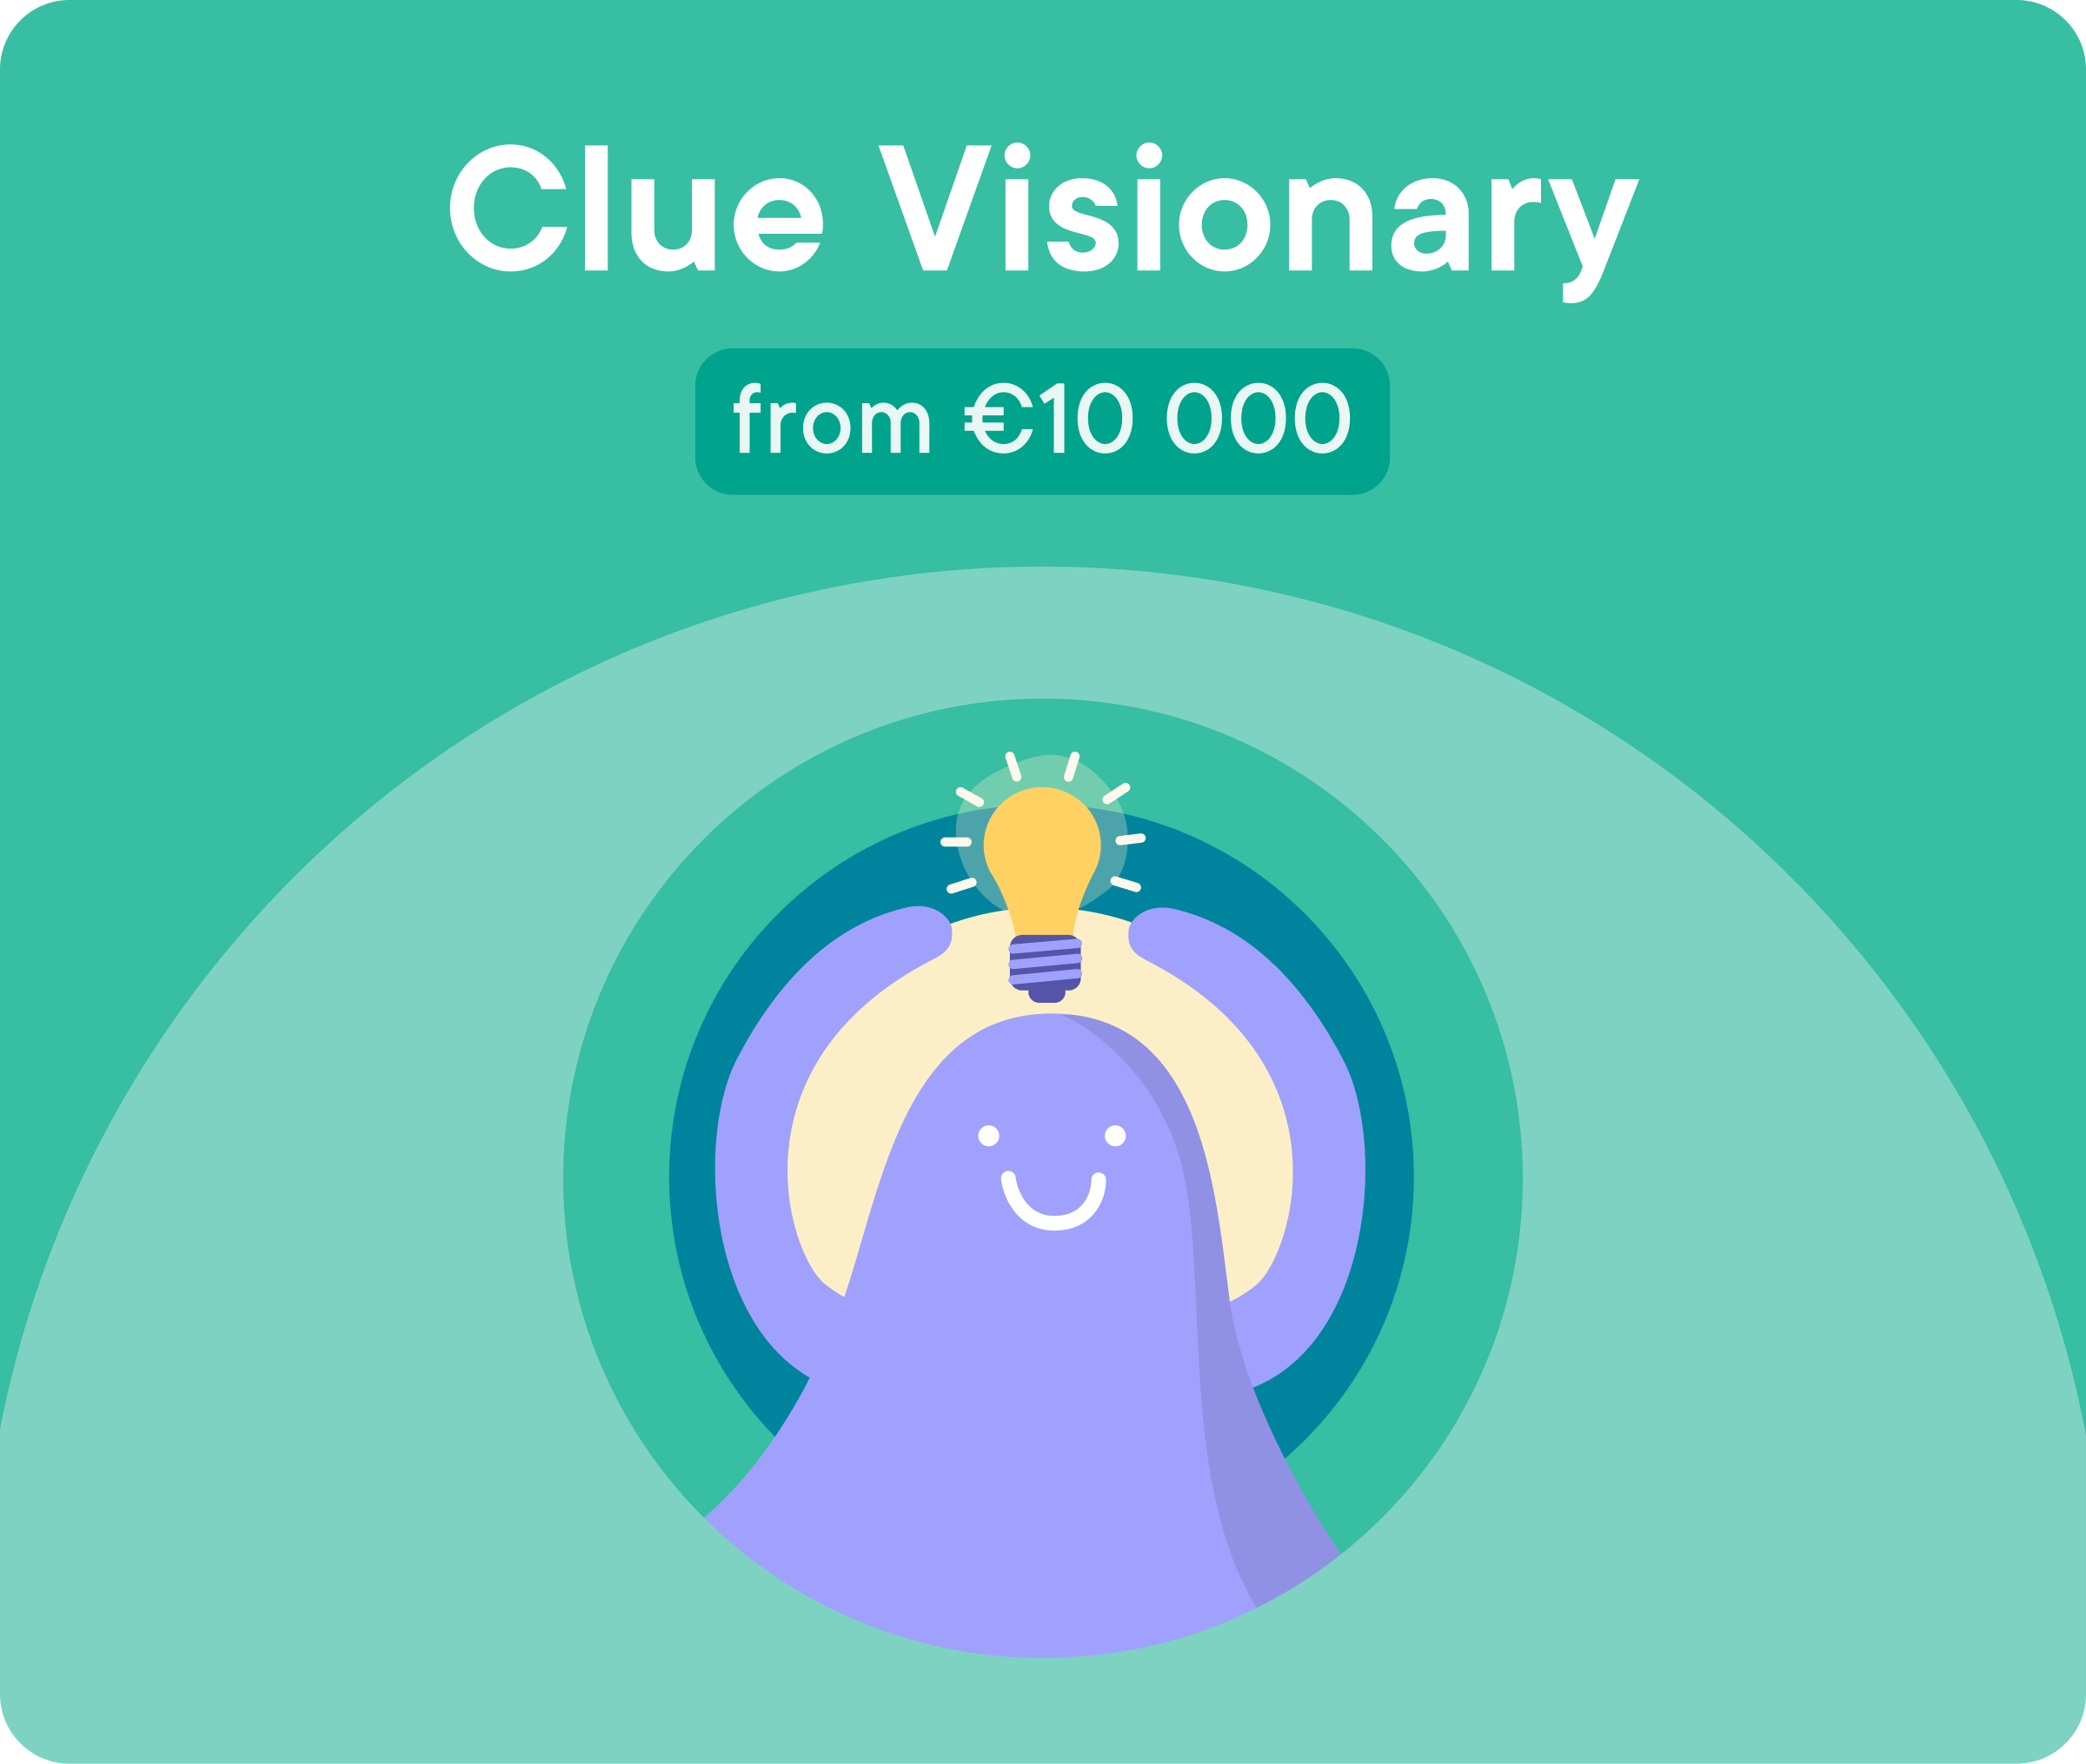 Clue Visionary from €10000